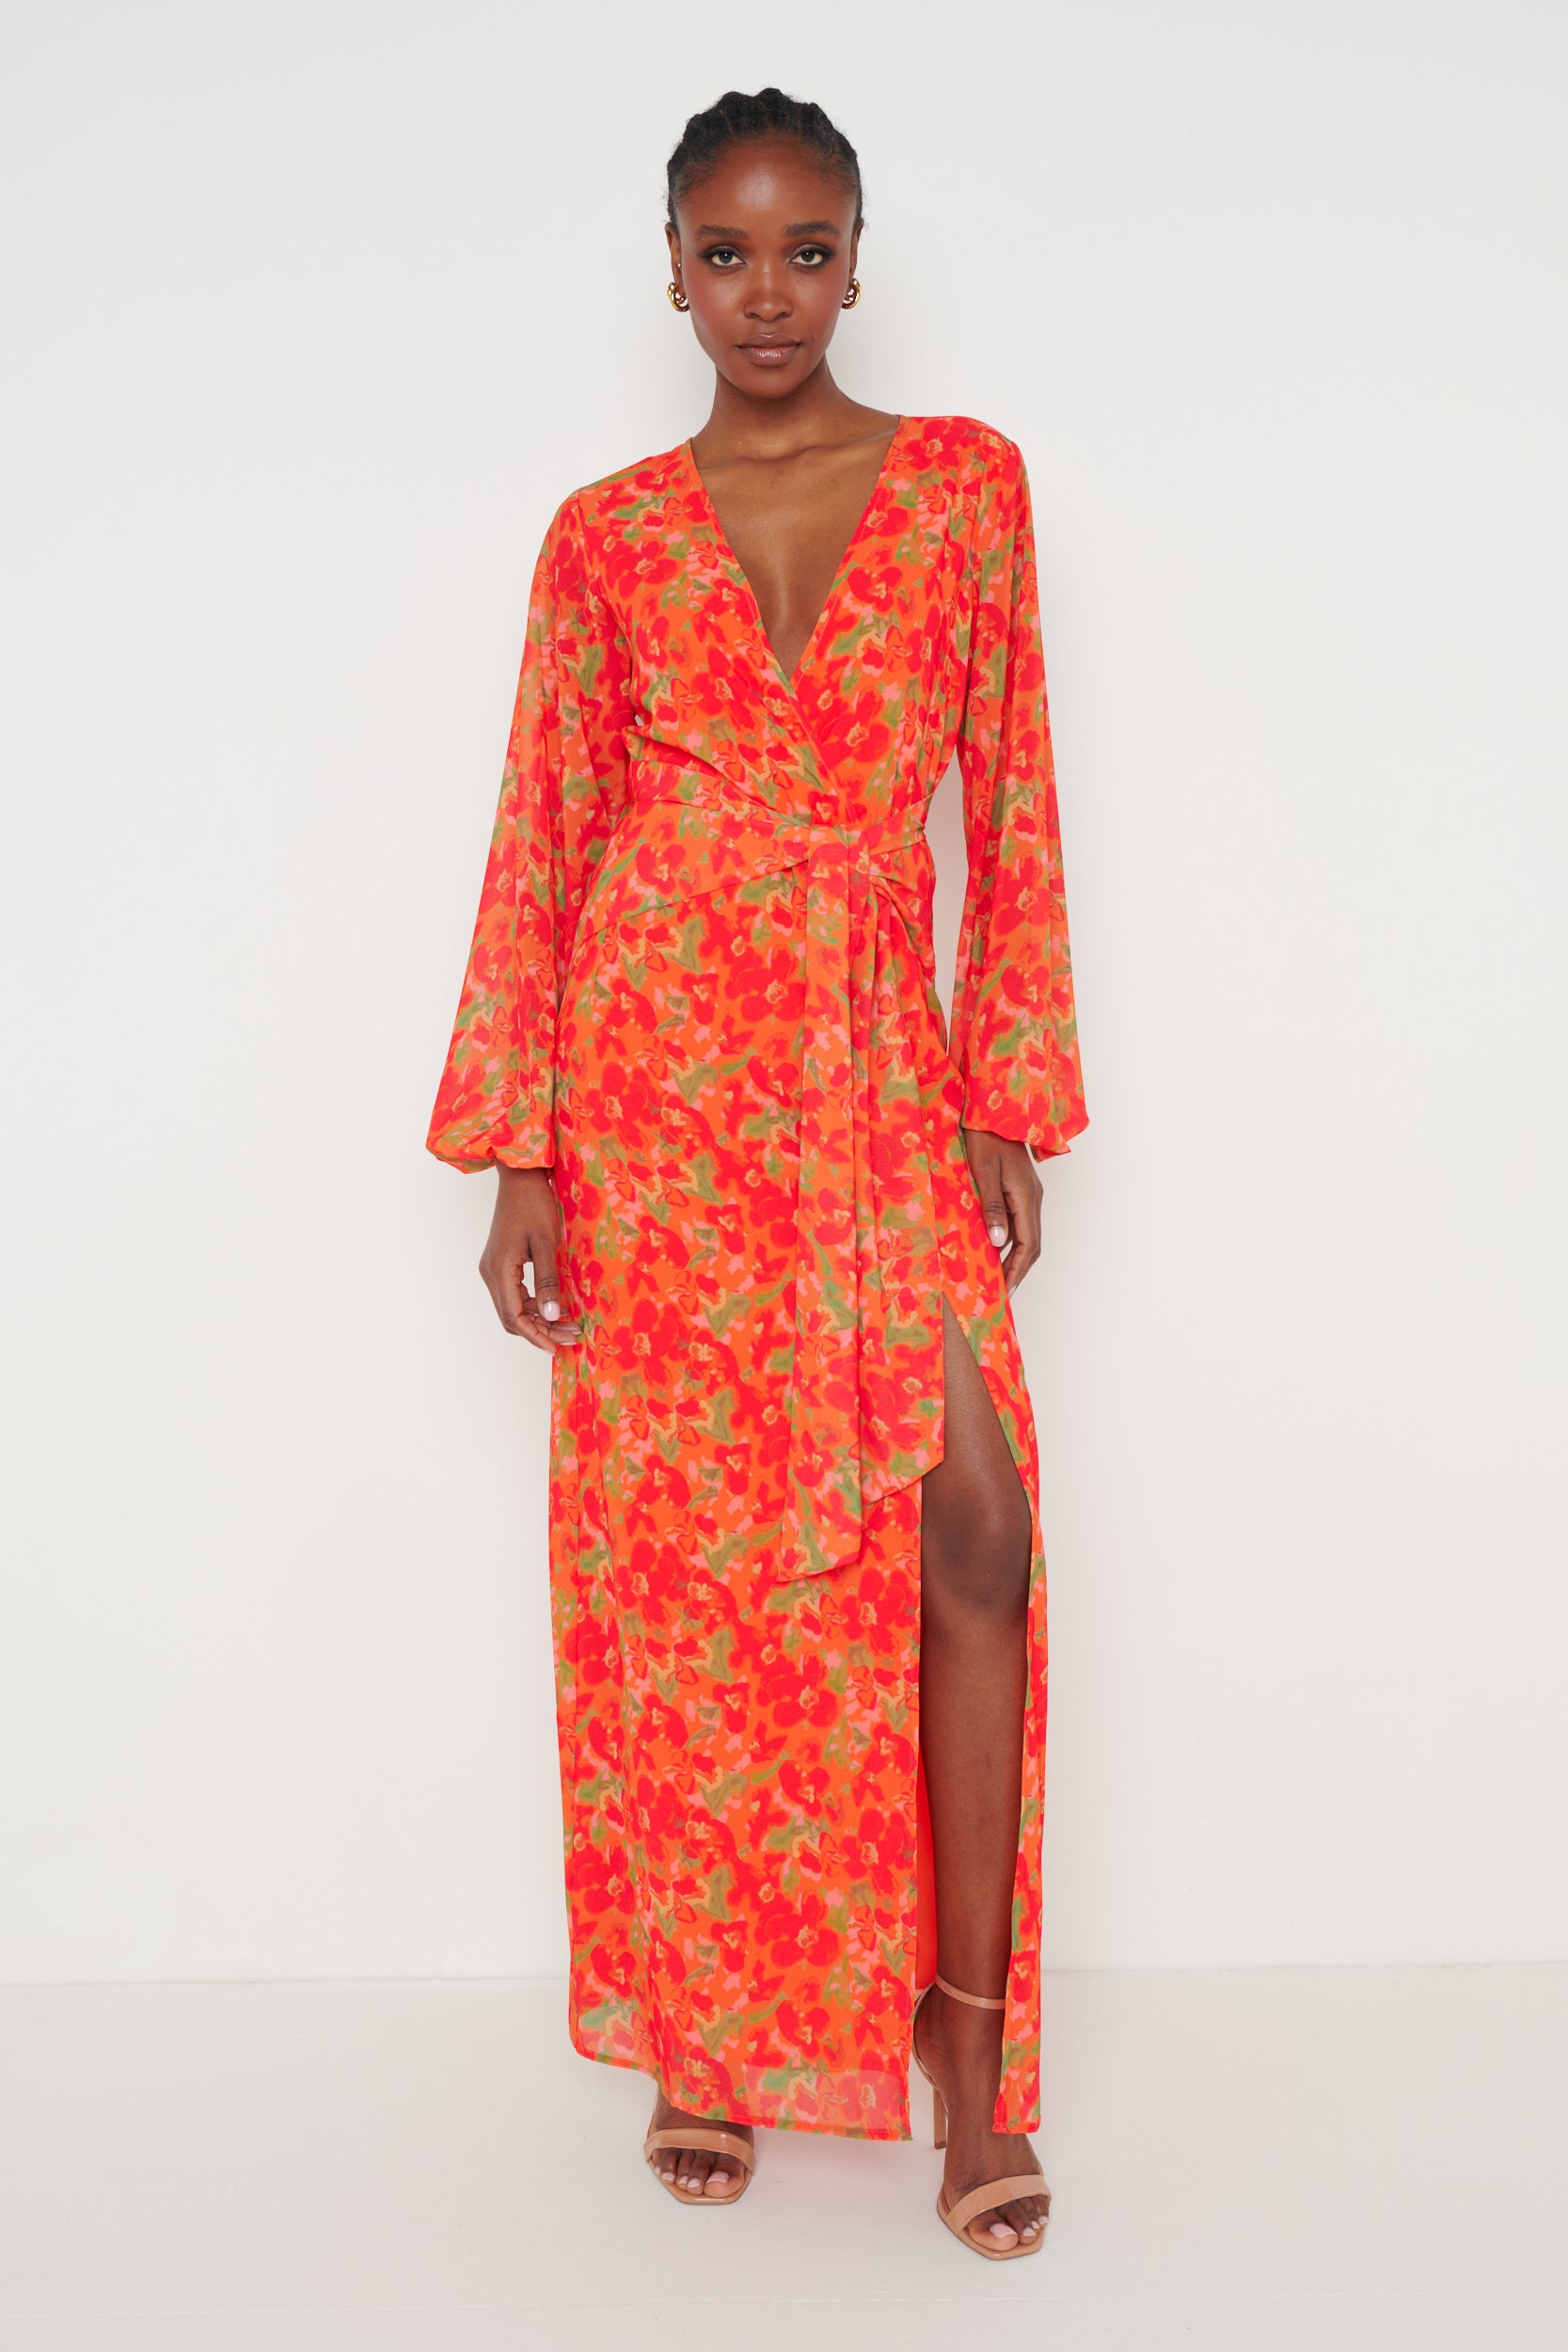 Alexis Knot Drape Dress - Red and Orange Floral